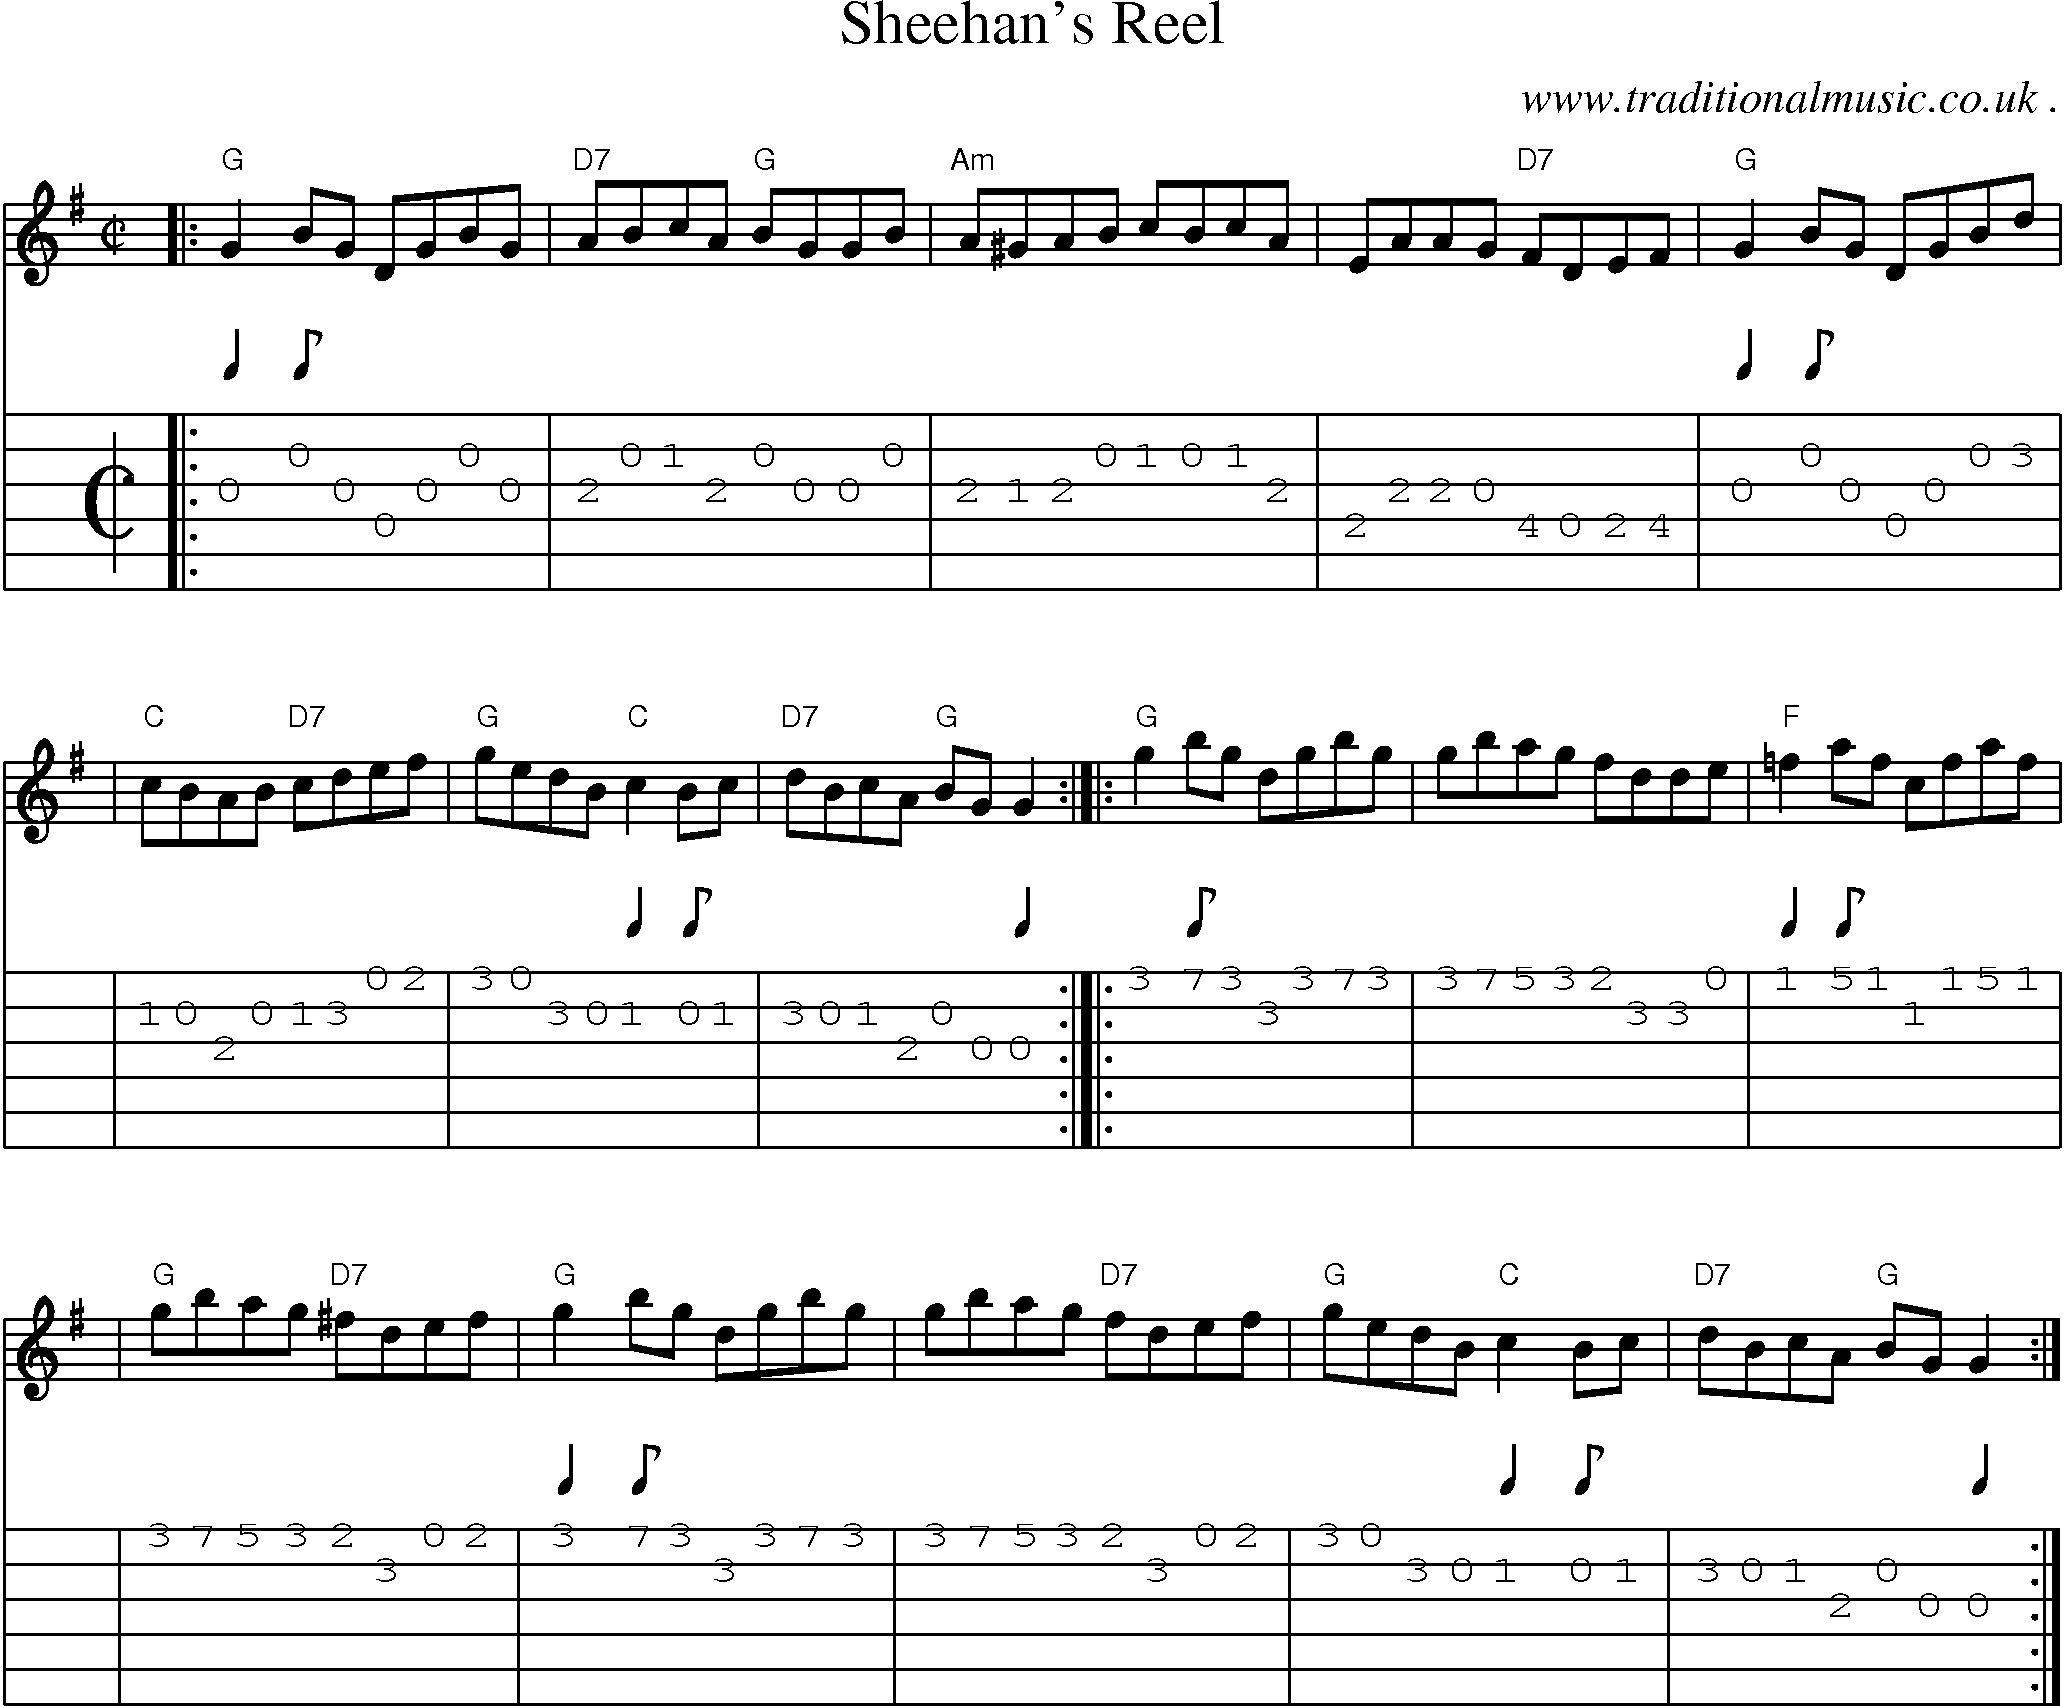 Sheet-music  score, Chords and Guitar Tabs for Sheehans Reel